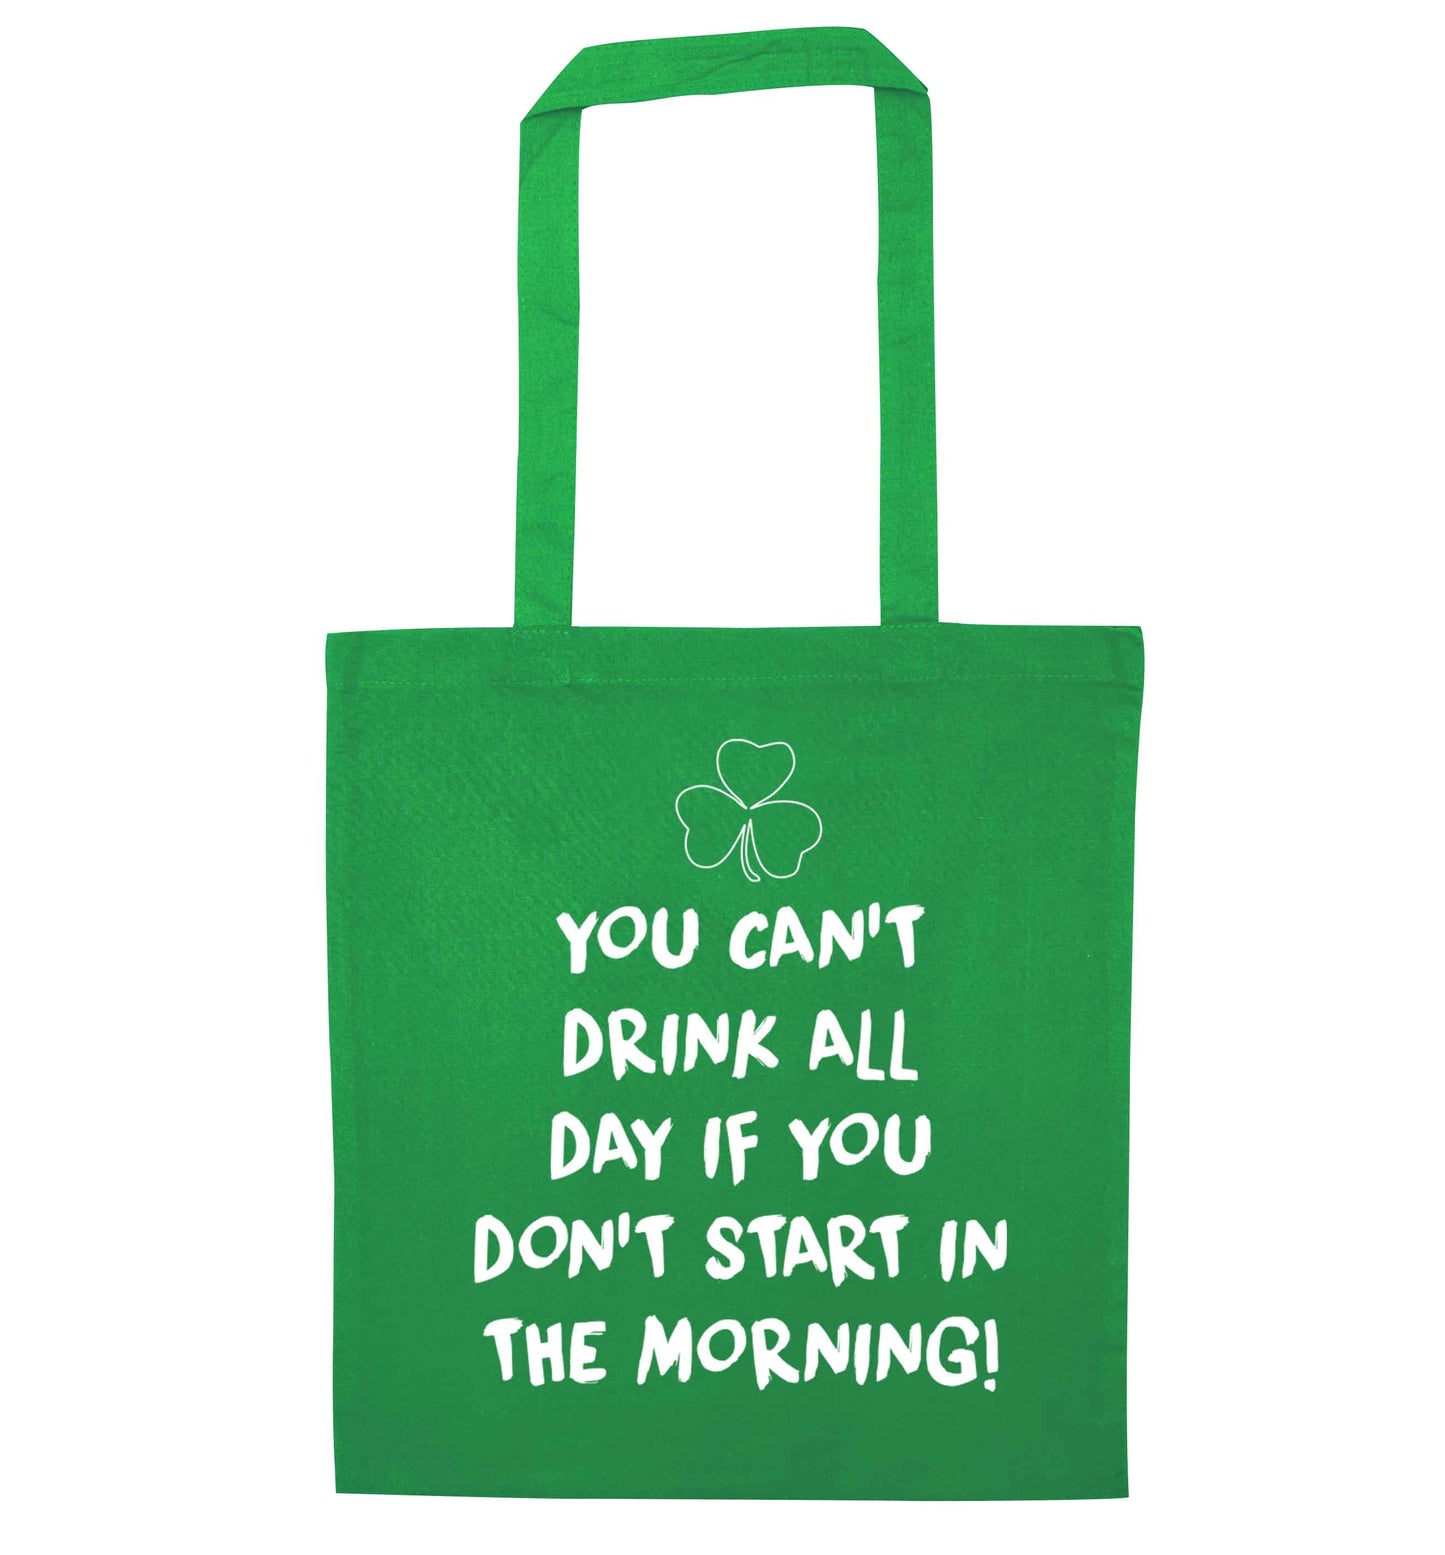 You can't drink all day if you don't start in the morning green tote bag